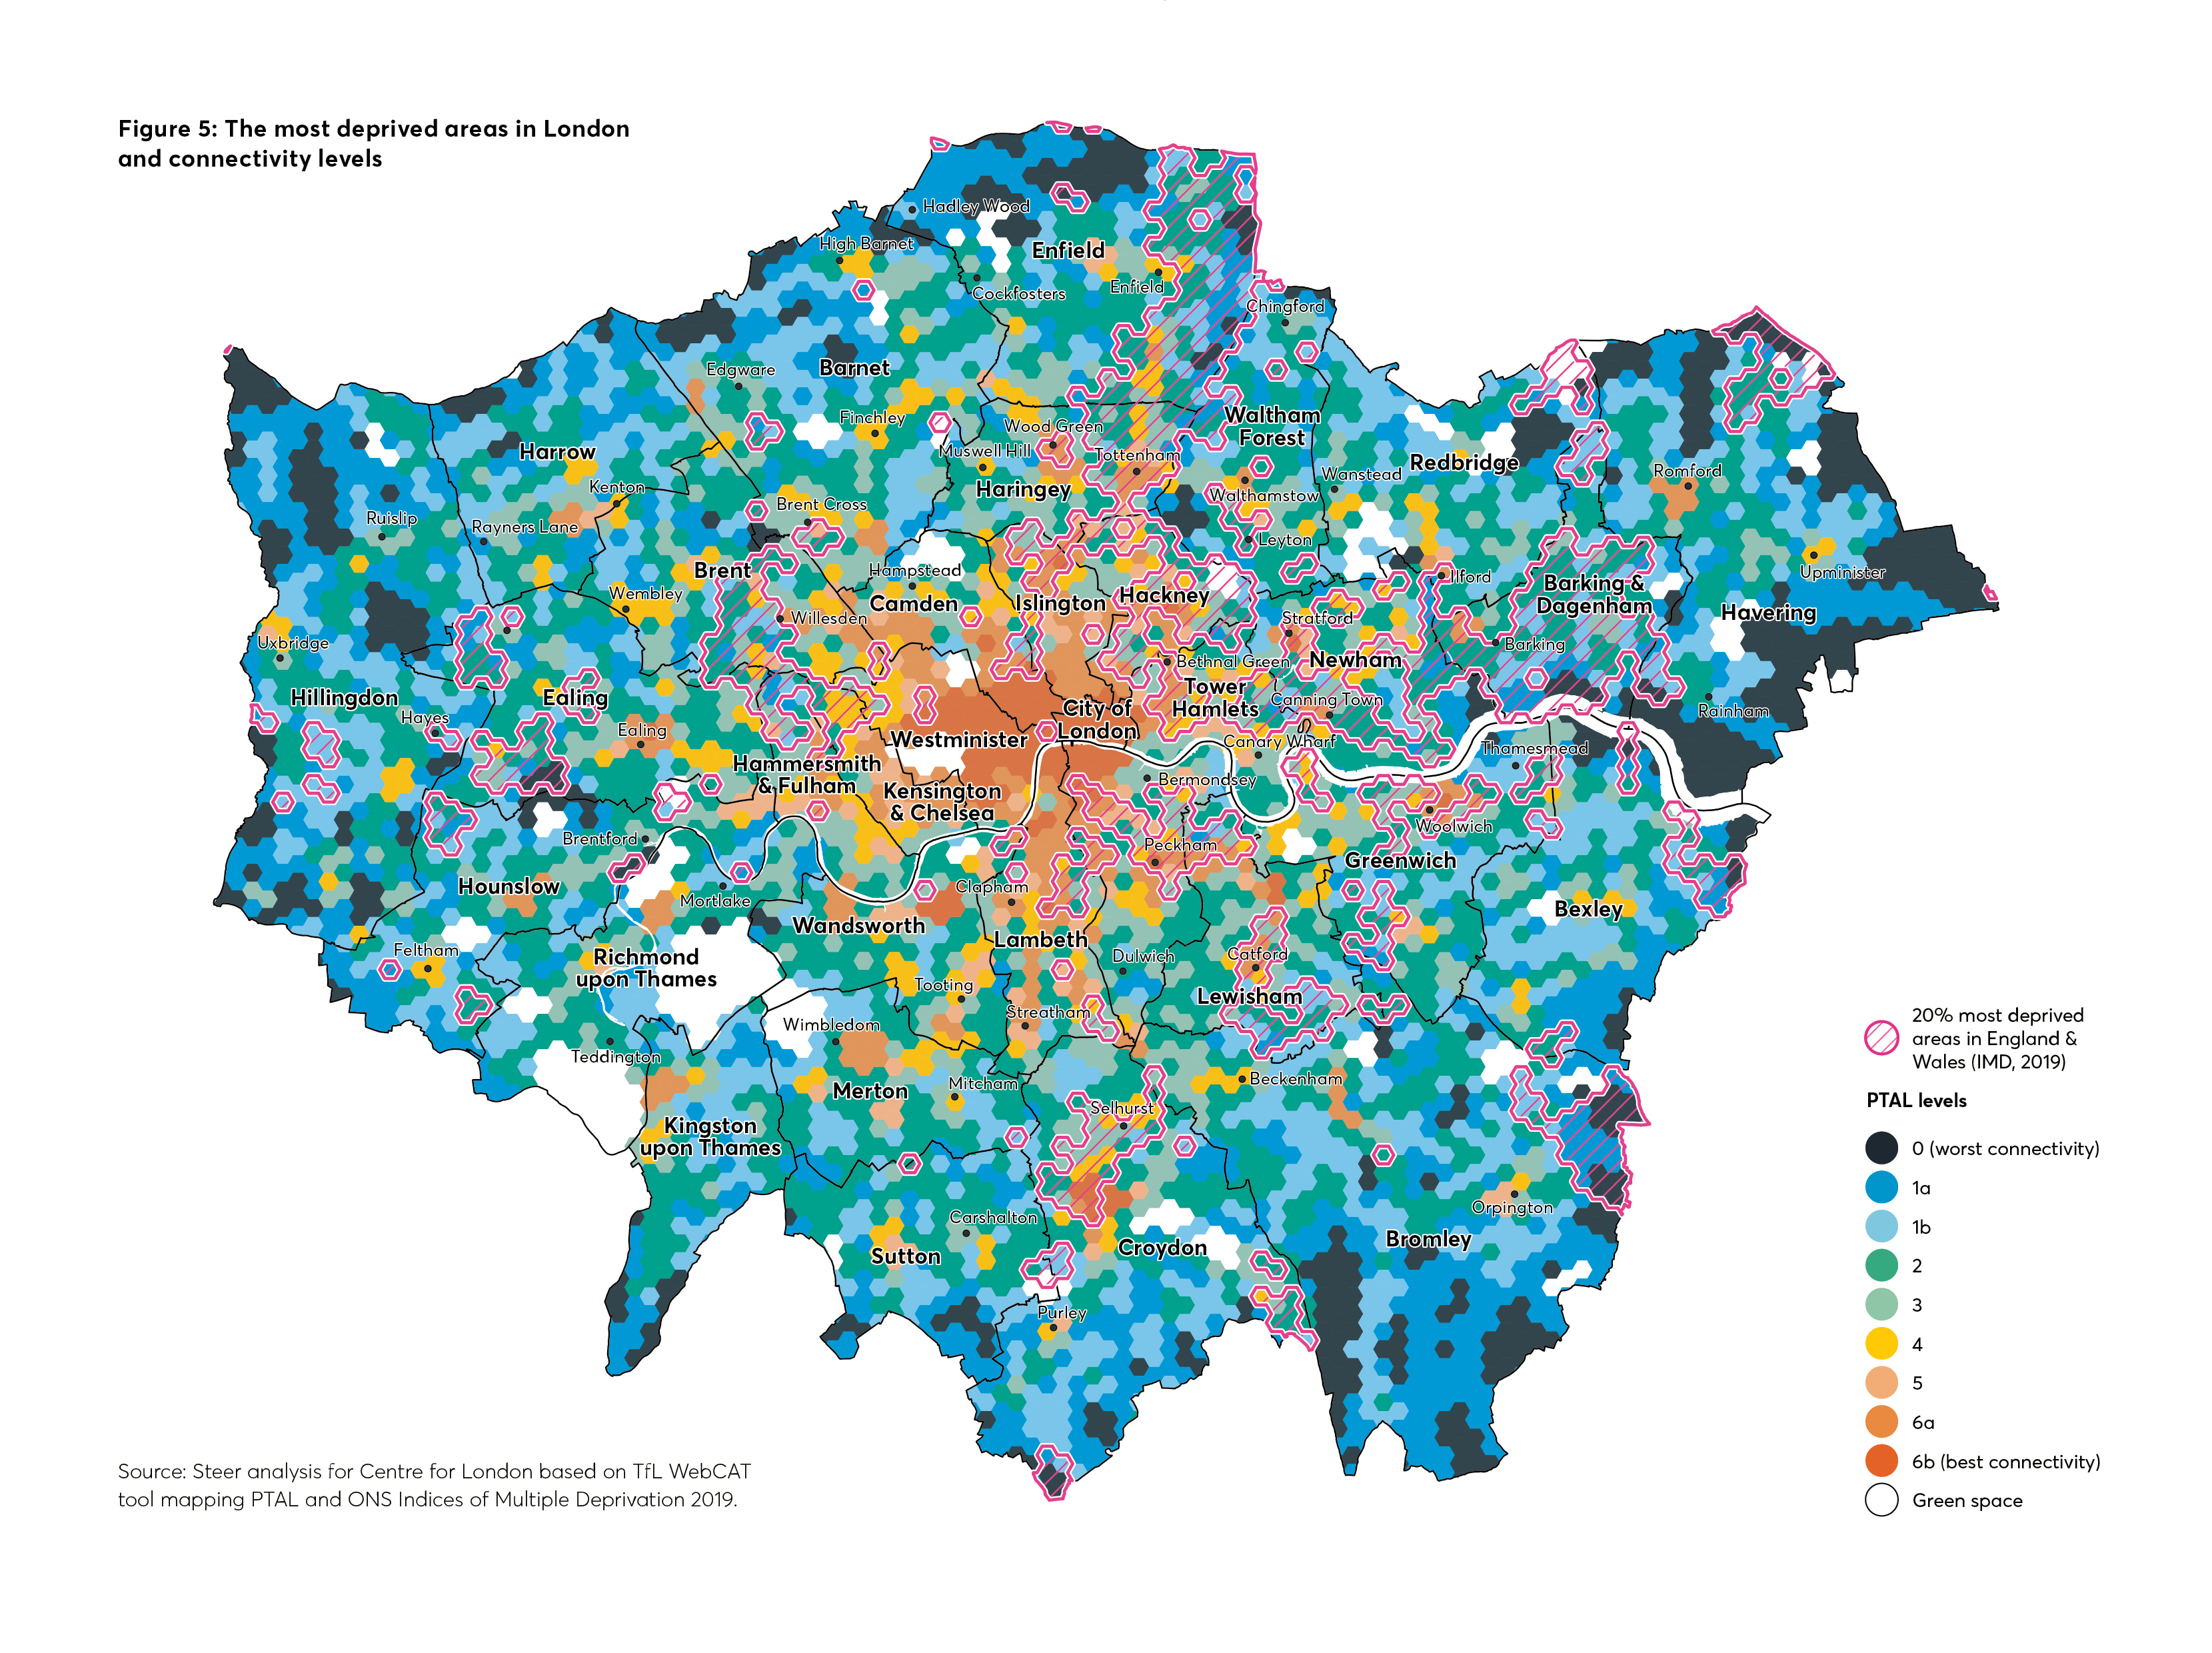 The most deprived areas in London and connectivity levels